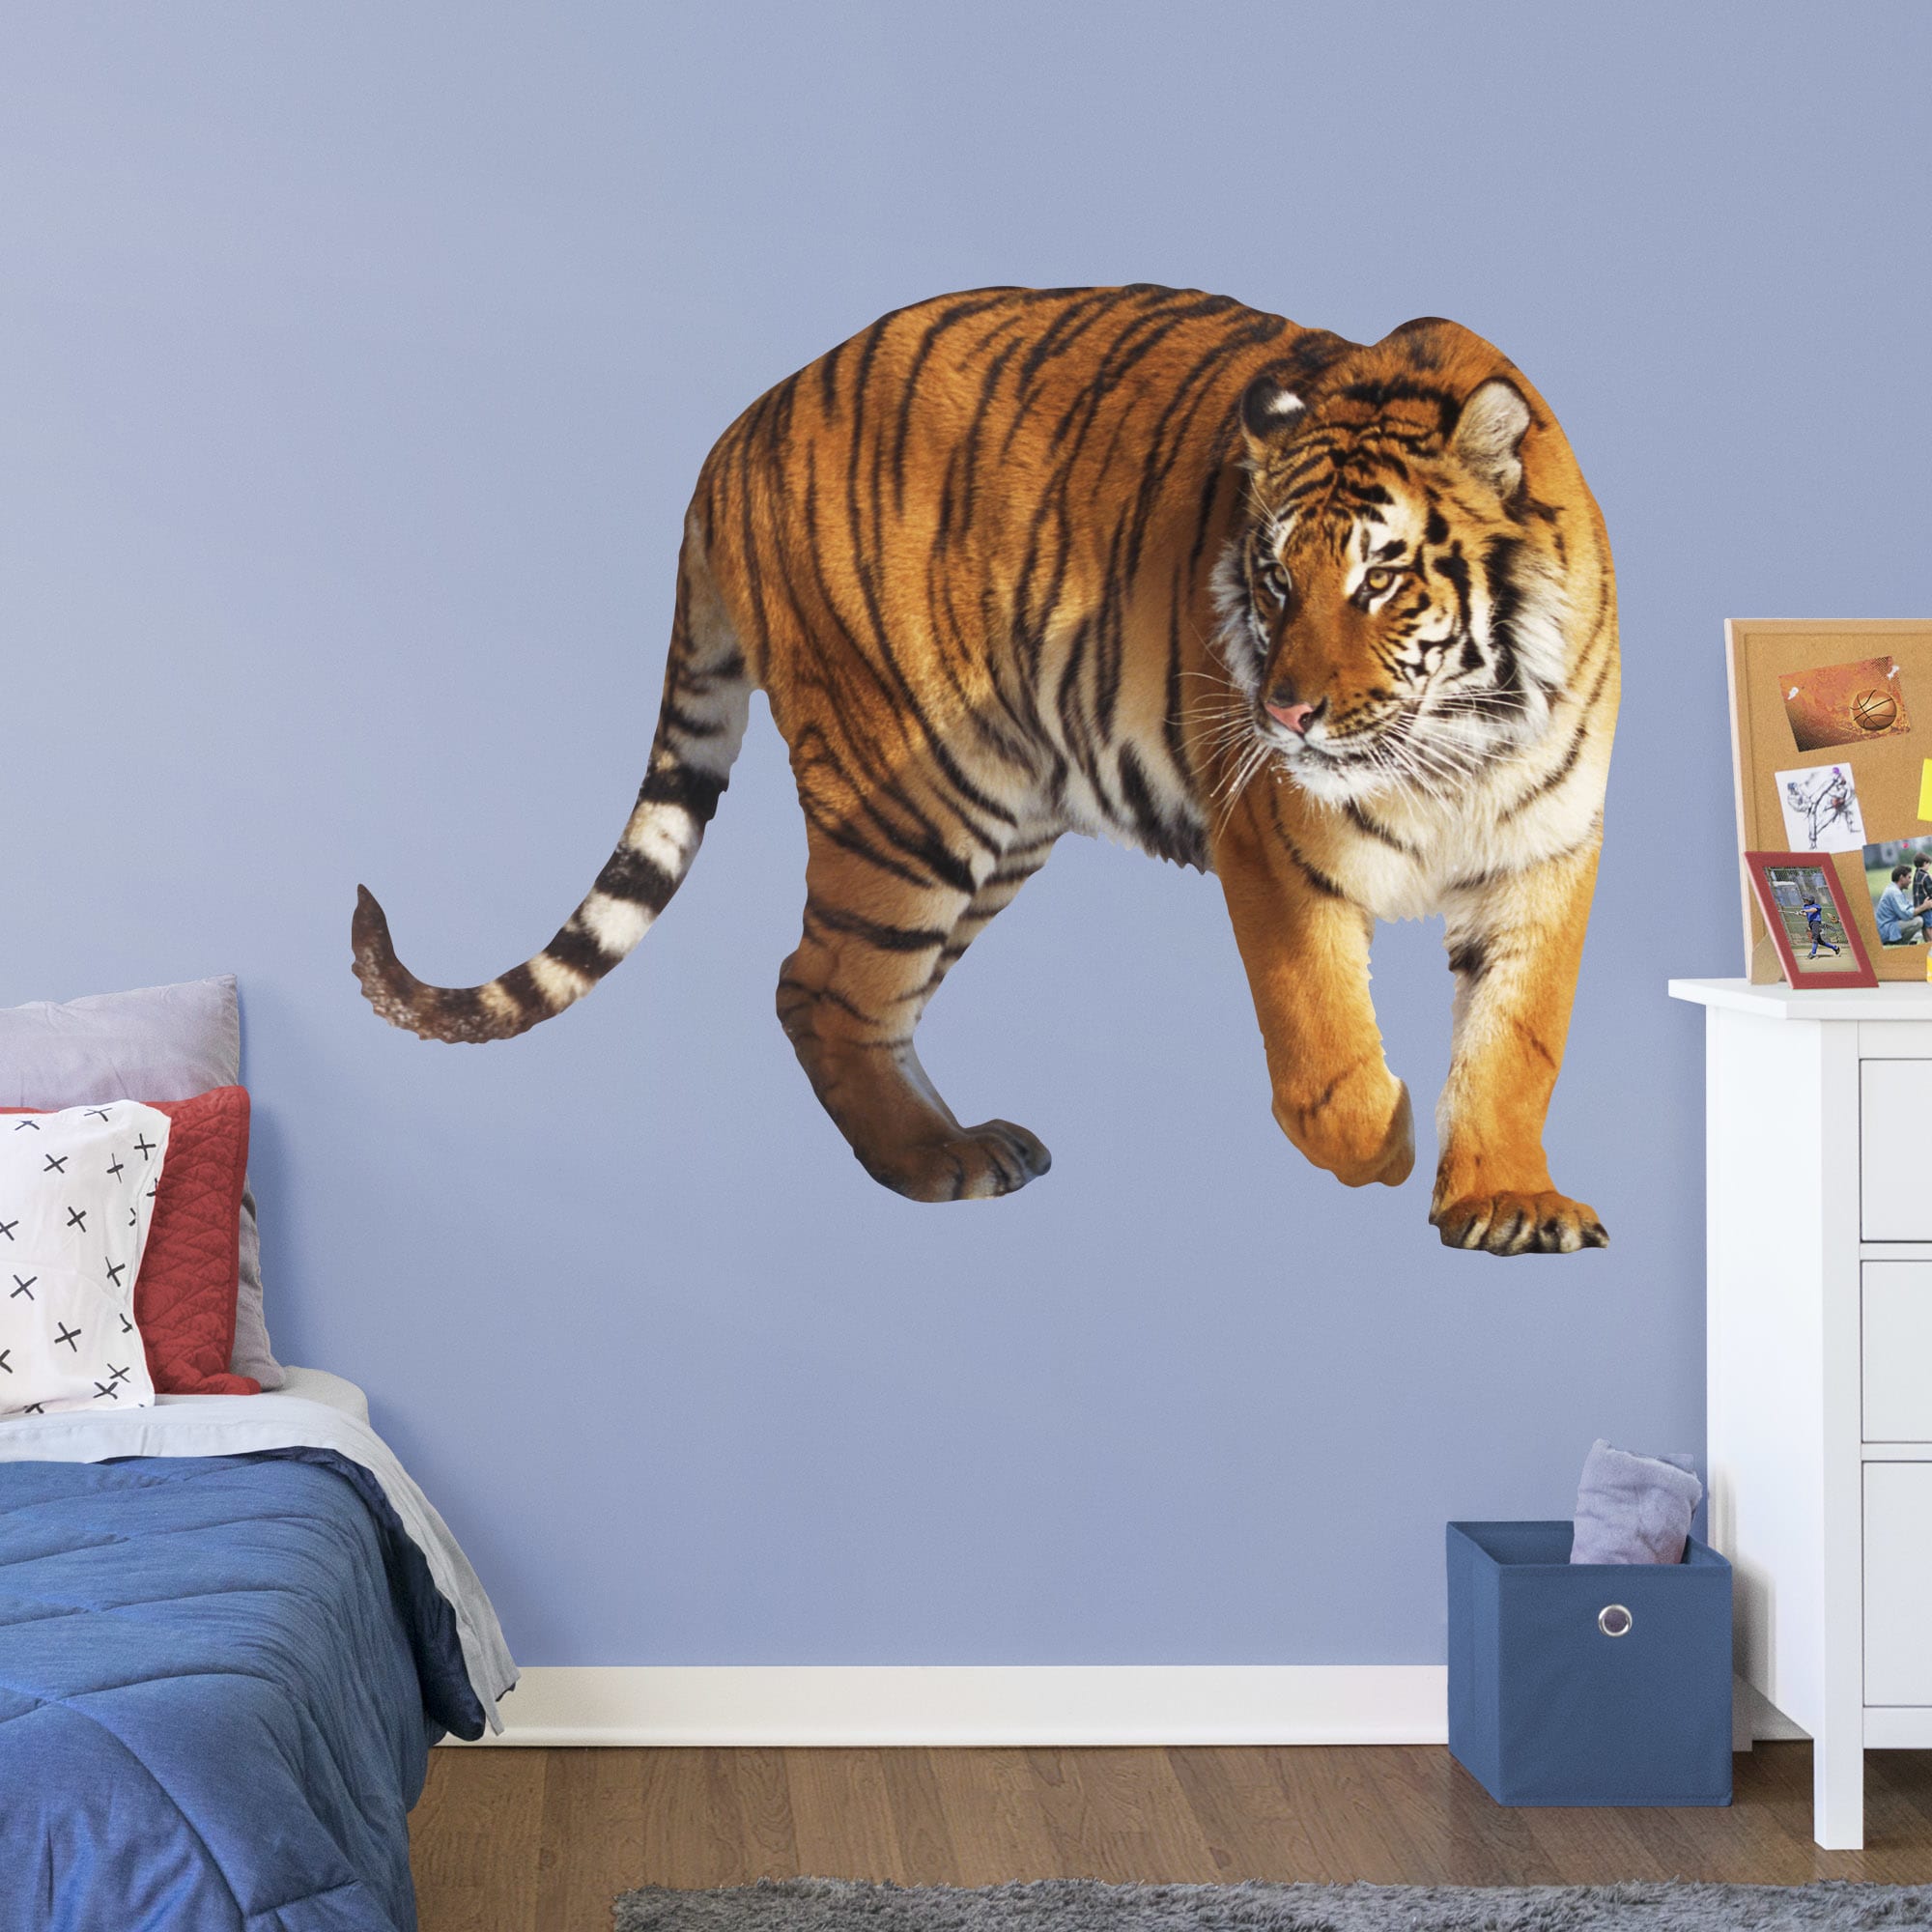 Tiger - Removable Vinyl Decal Life-Size Animal + 2 Licensed Decals (69"W x 53"H) by Fathead